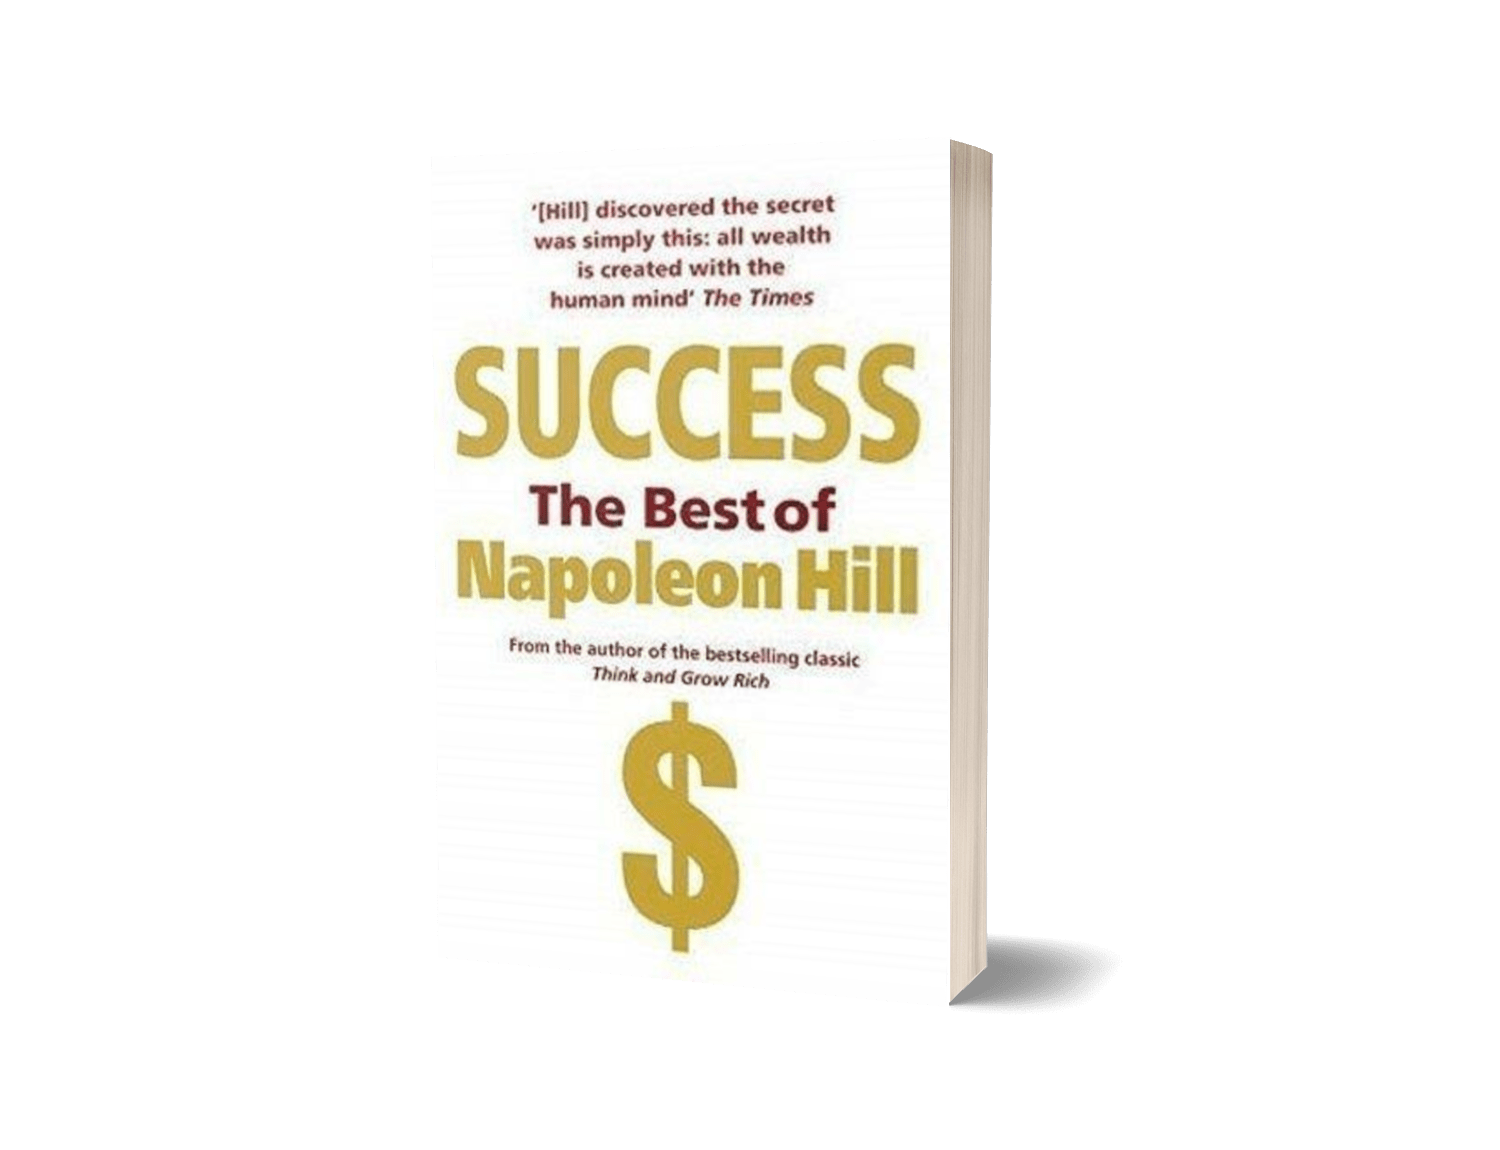 Success by Napoleon Hill